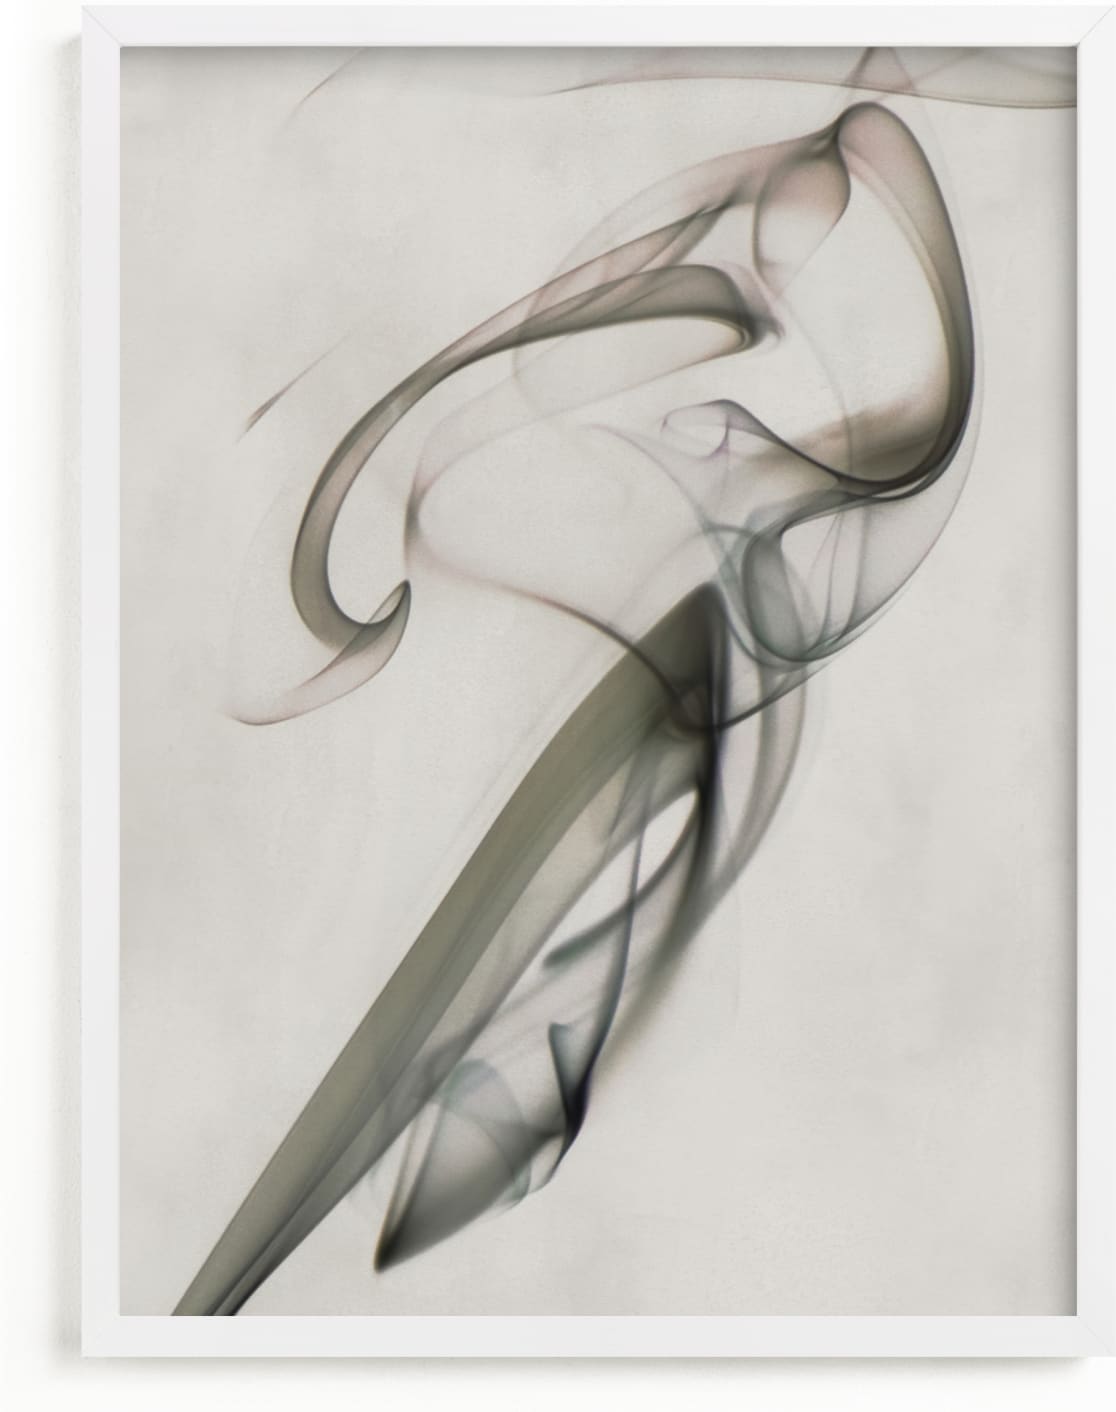 This is a grey art by Anne Ciotola called Flow.